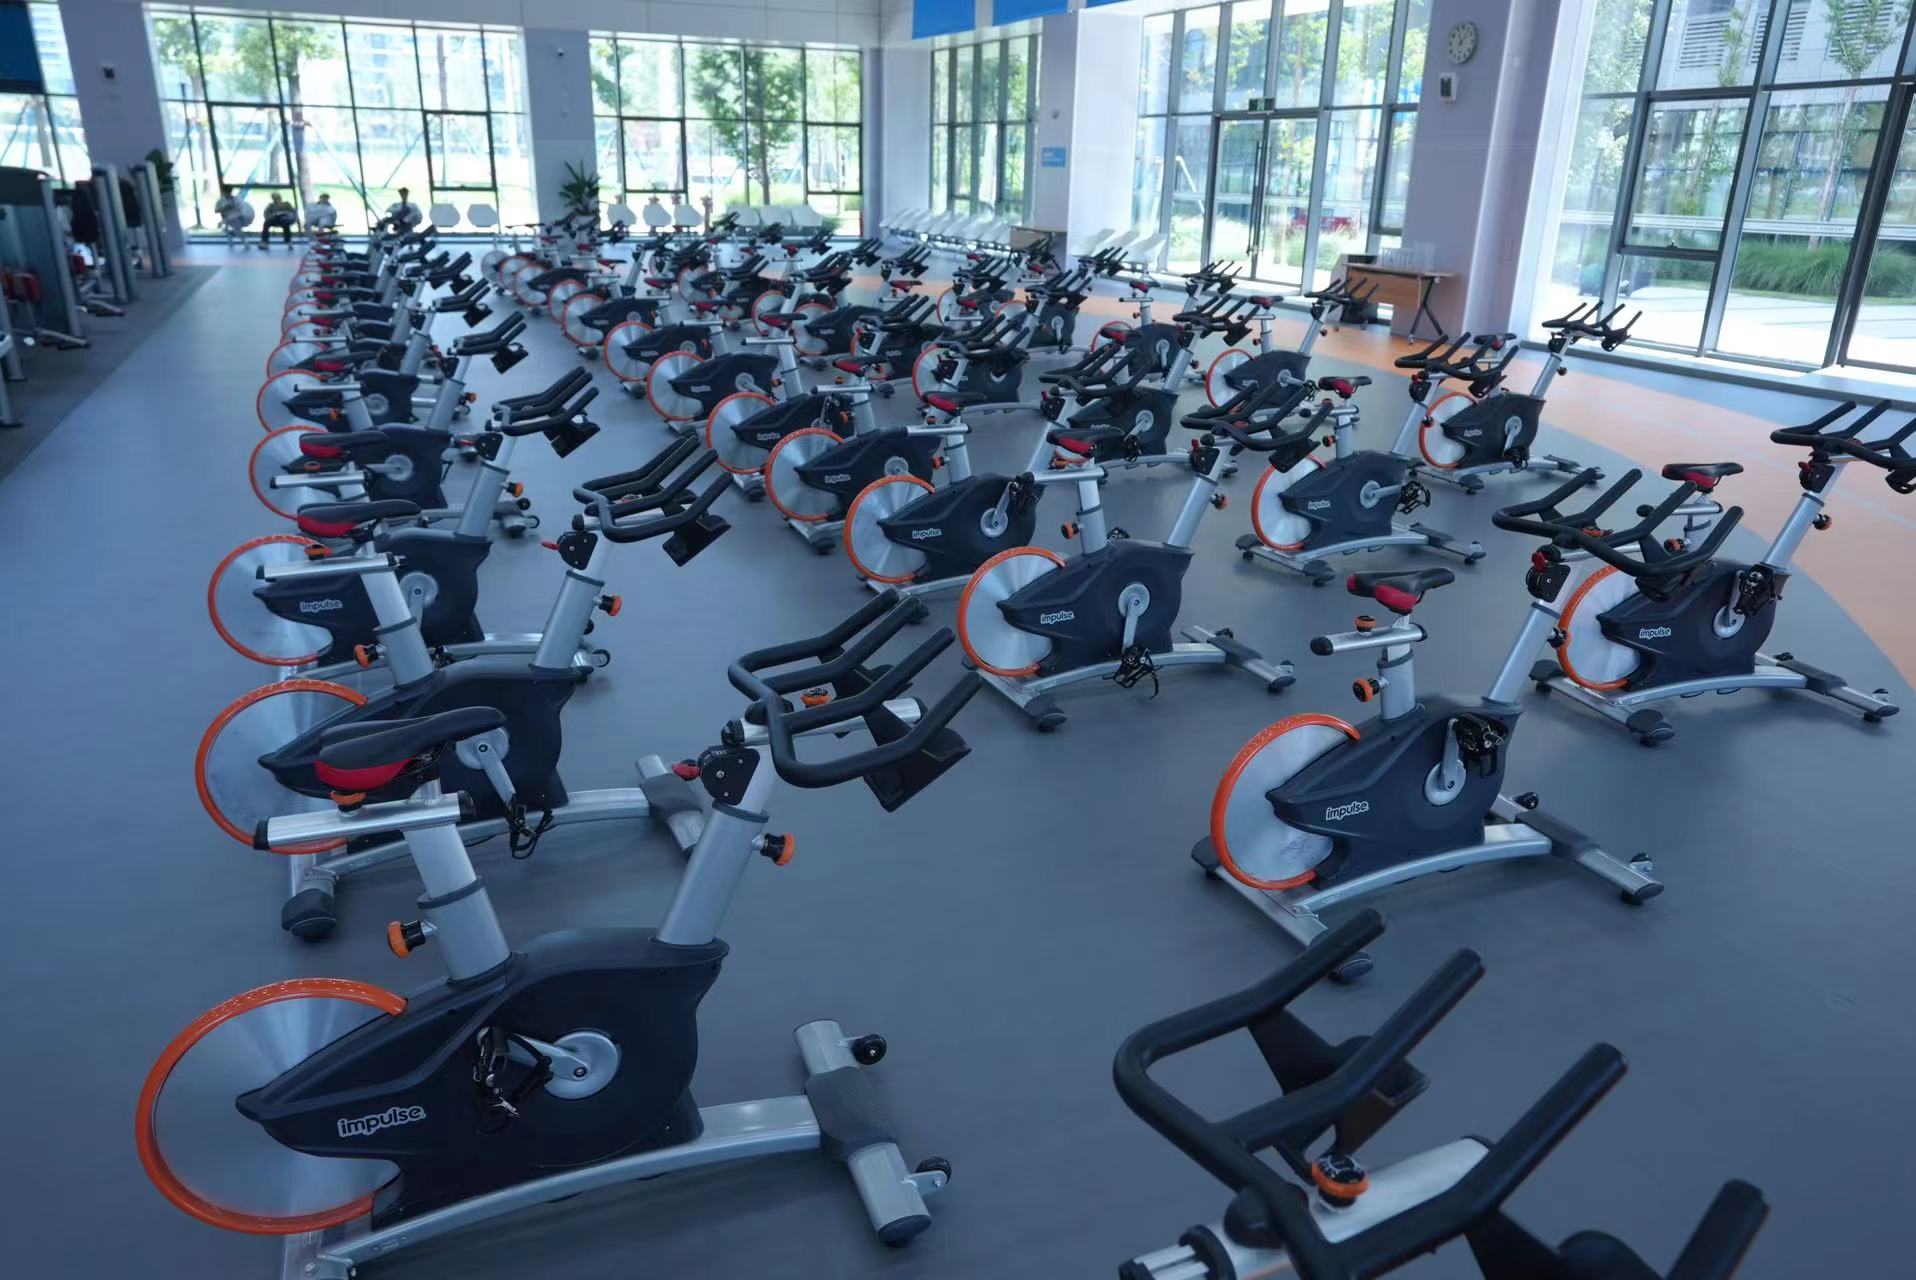 Gym equipment in the athletes' village for the 31st World University Games in Chengdu, southwest China's Sichuan Province. /CGTN